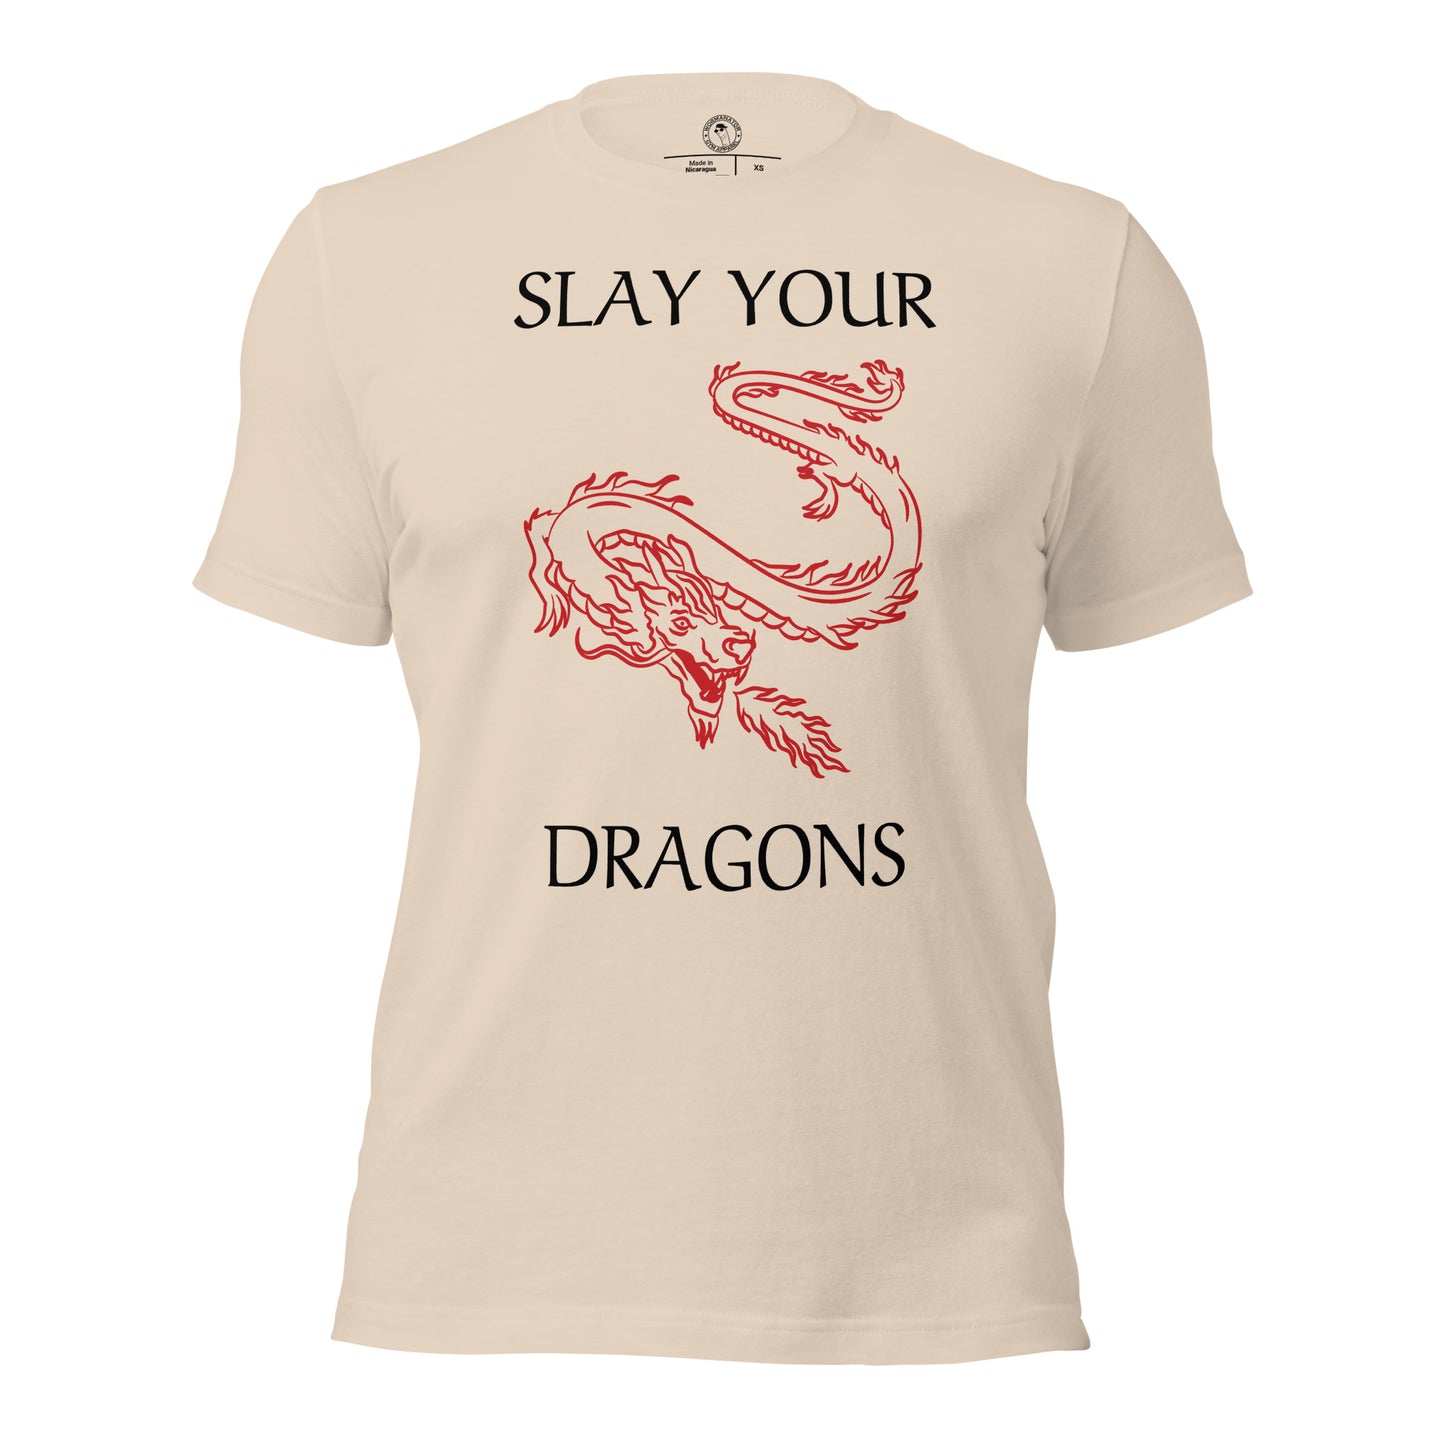 Slay Your Dragons Shirt in Soft Cream